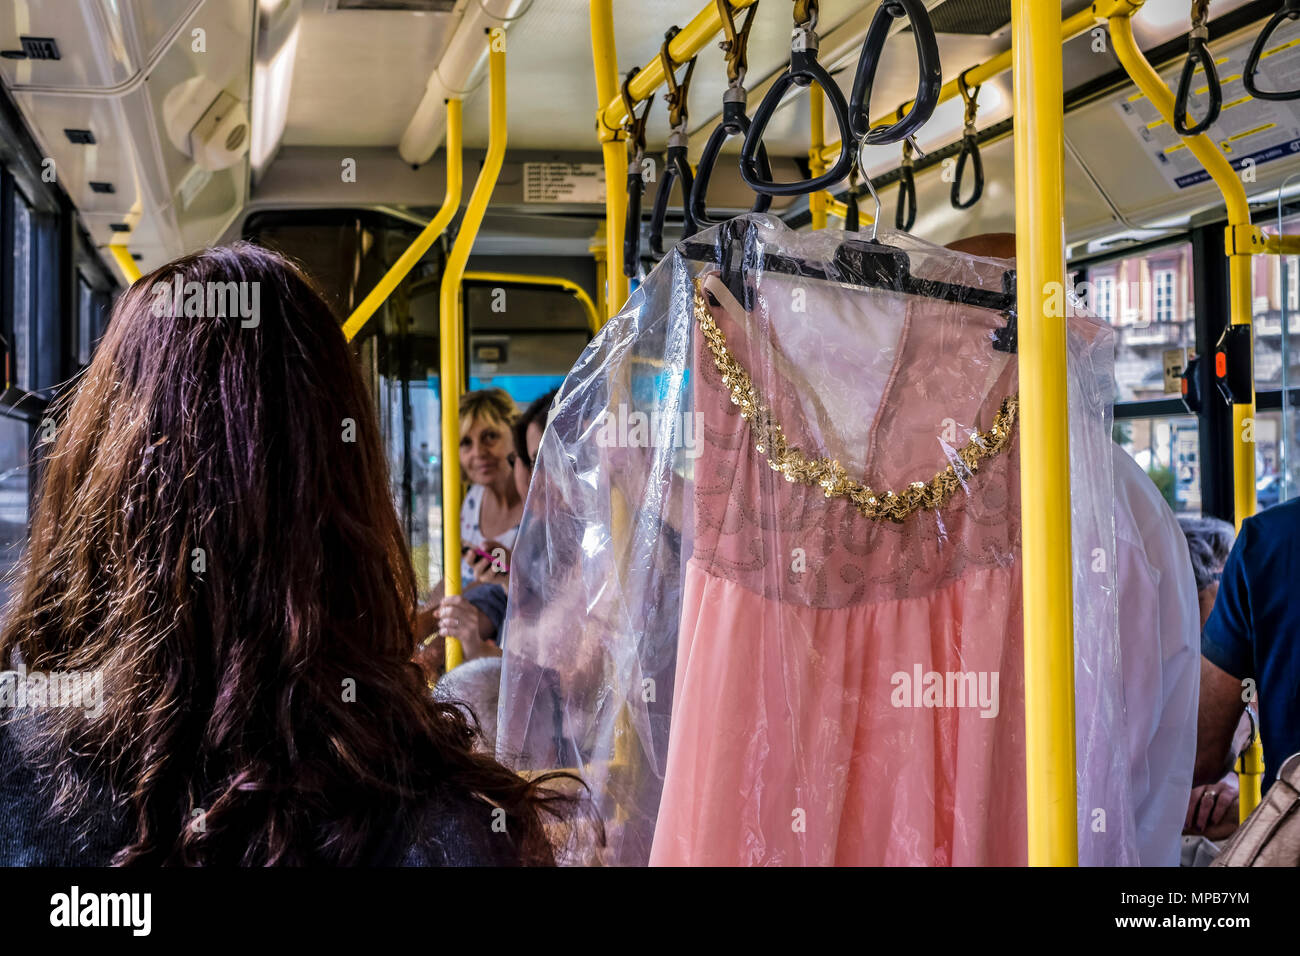 Woman fetched a pink dress with sequins (paillettes), wrapped in a dry cleaning laundry plastic bag, hung on handrail on a city urban public bus. Stock Photo